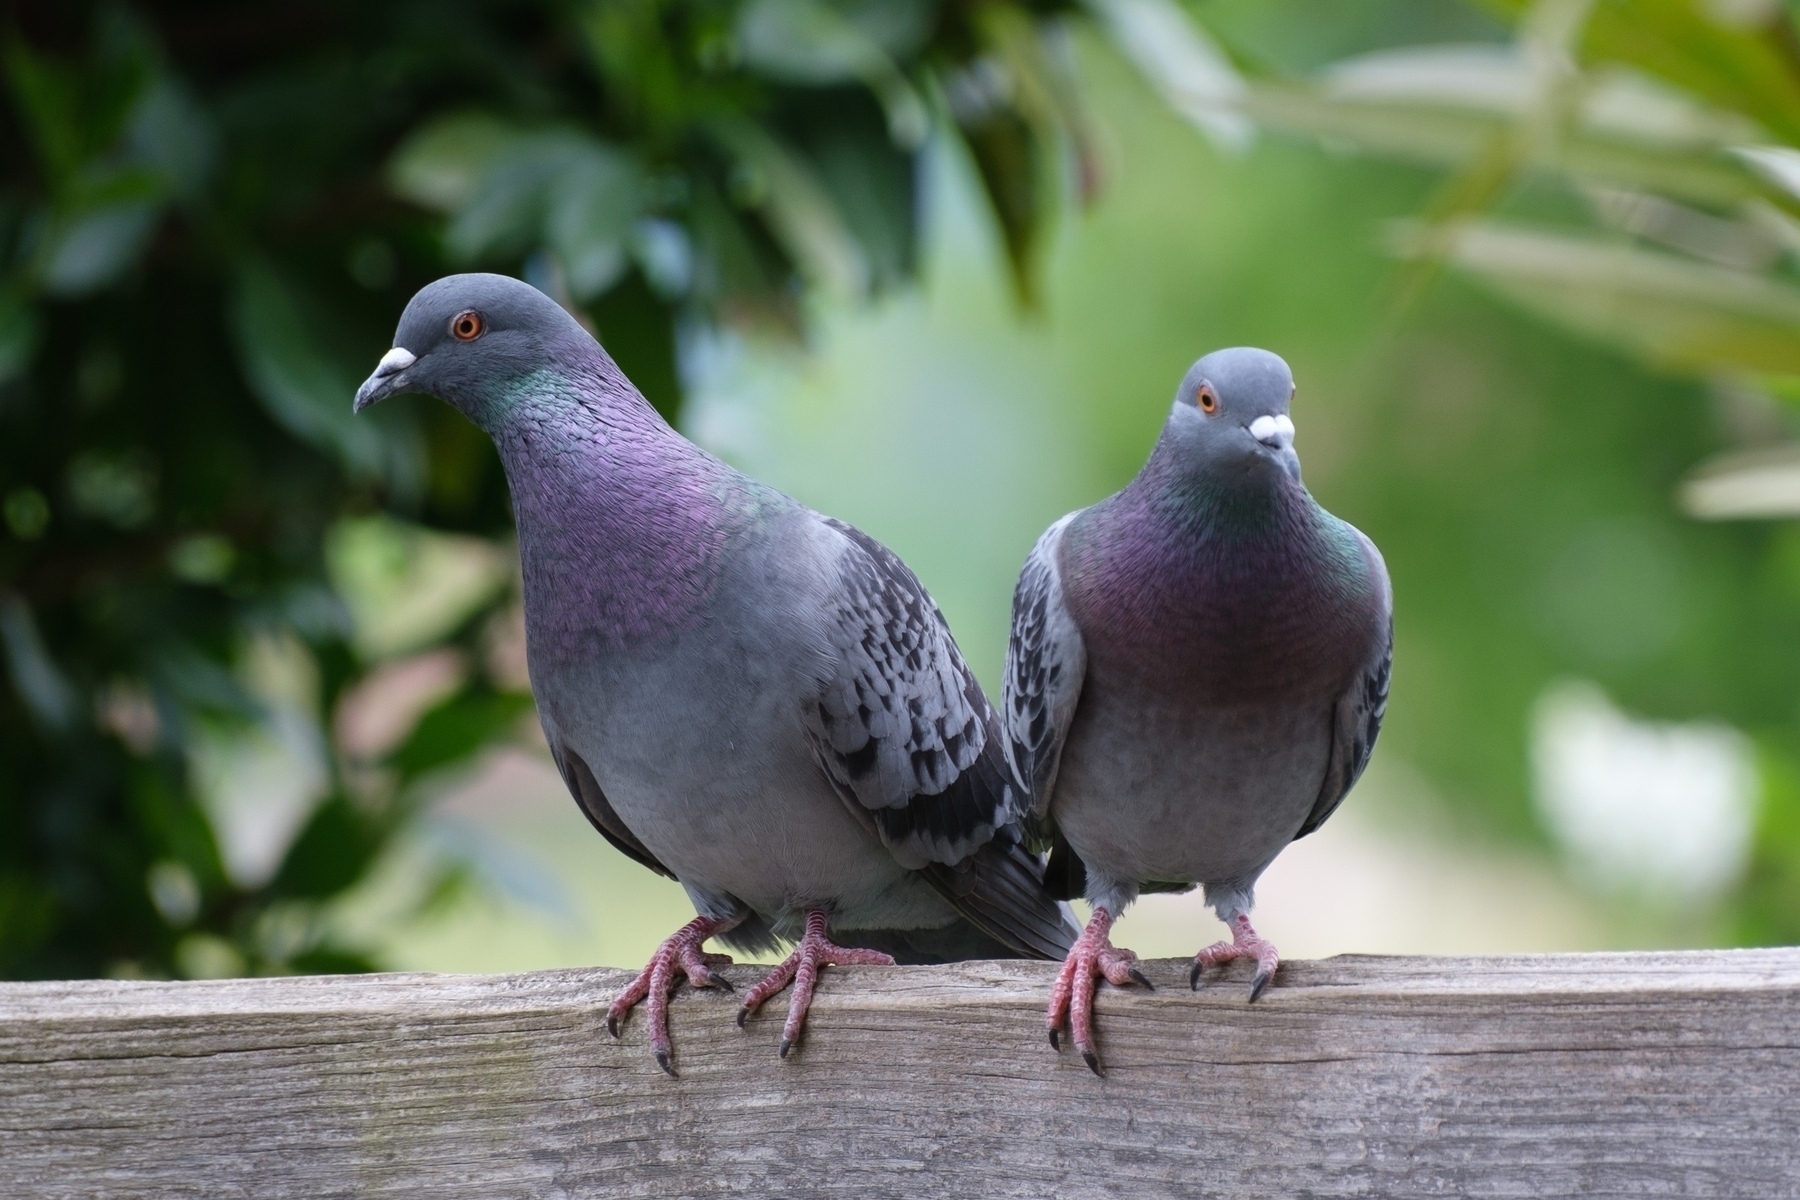 Two common pigeons sitting on a weathered wooden fence looking in opposite directions. The background is blurred greenery